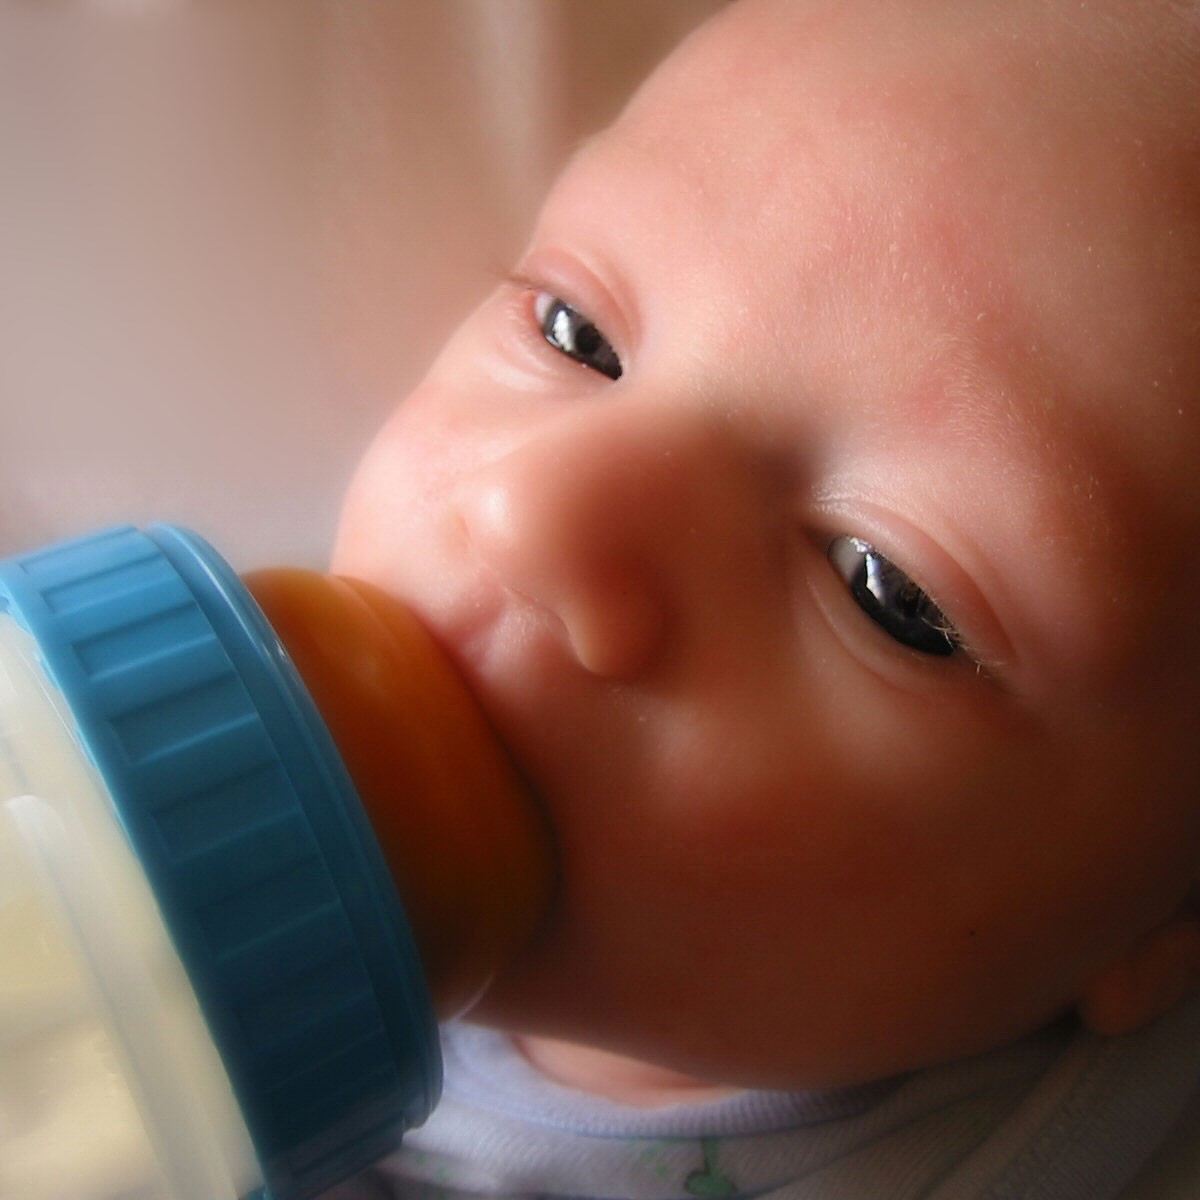 Baby feeding from a clear bottle with a blue top and tan nipple